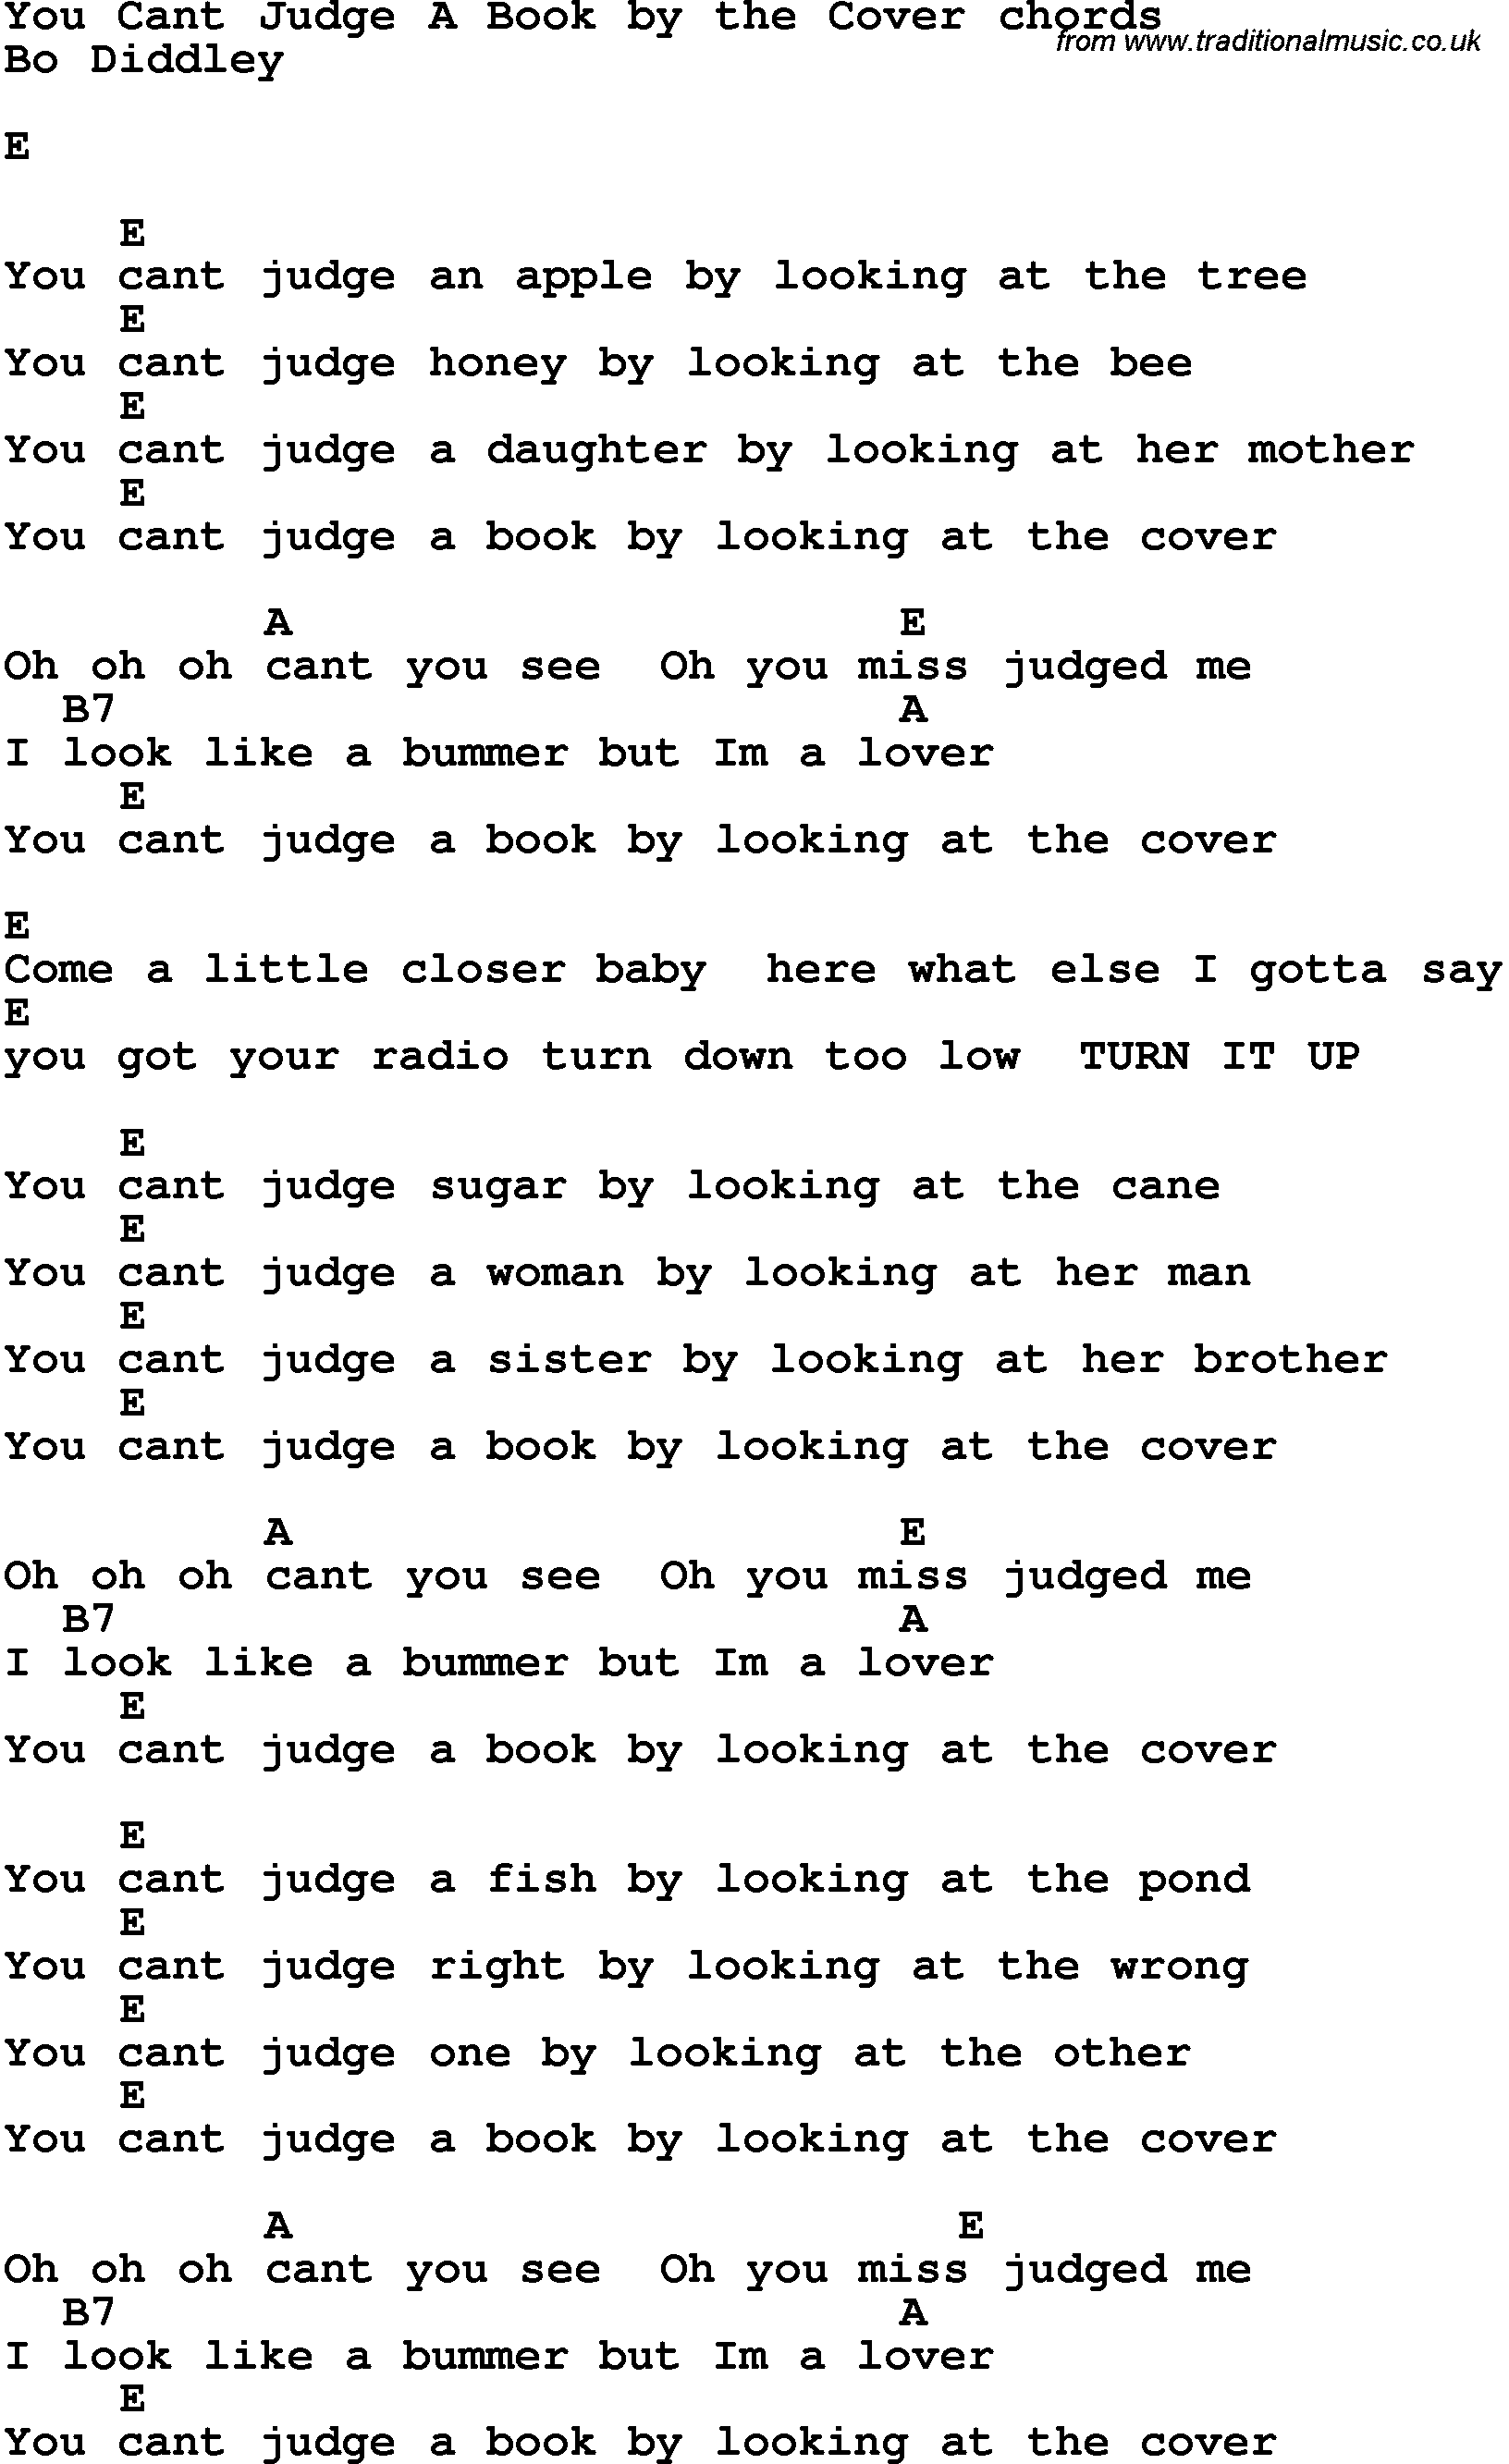 Song Lyrics with guitar chords for You Can't Judge A Book By The Cover